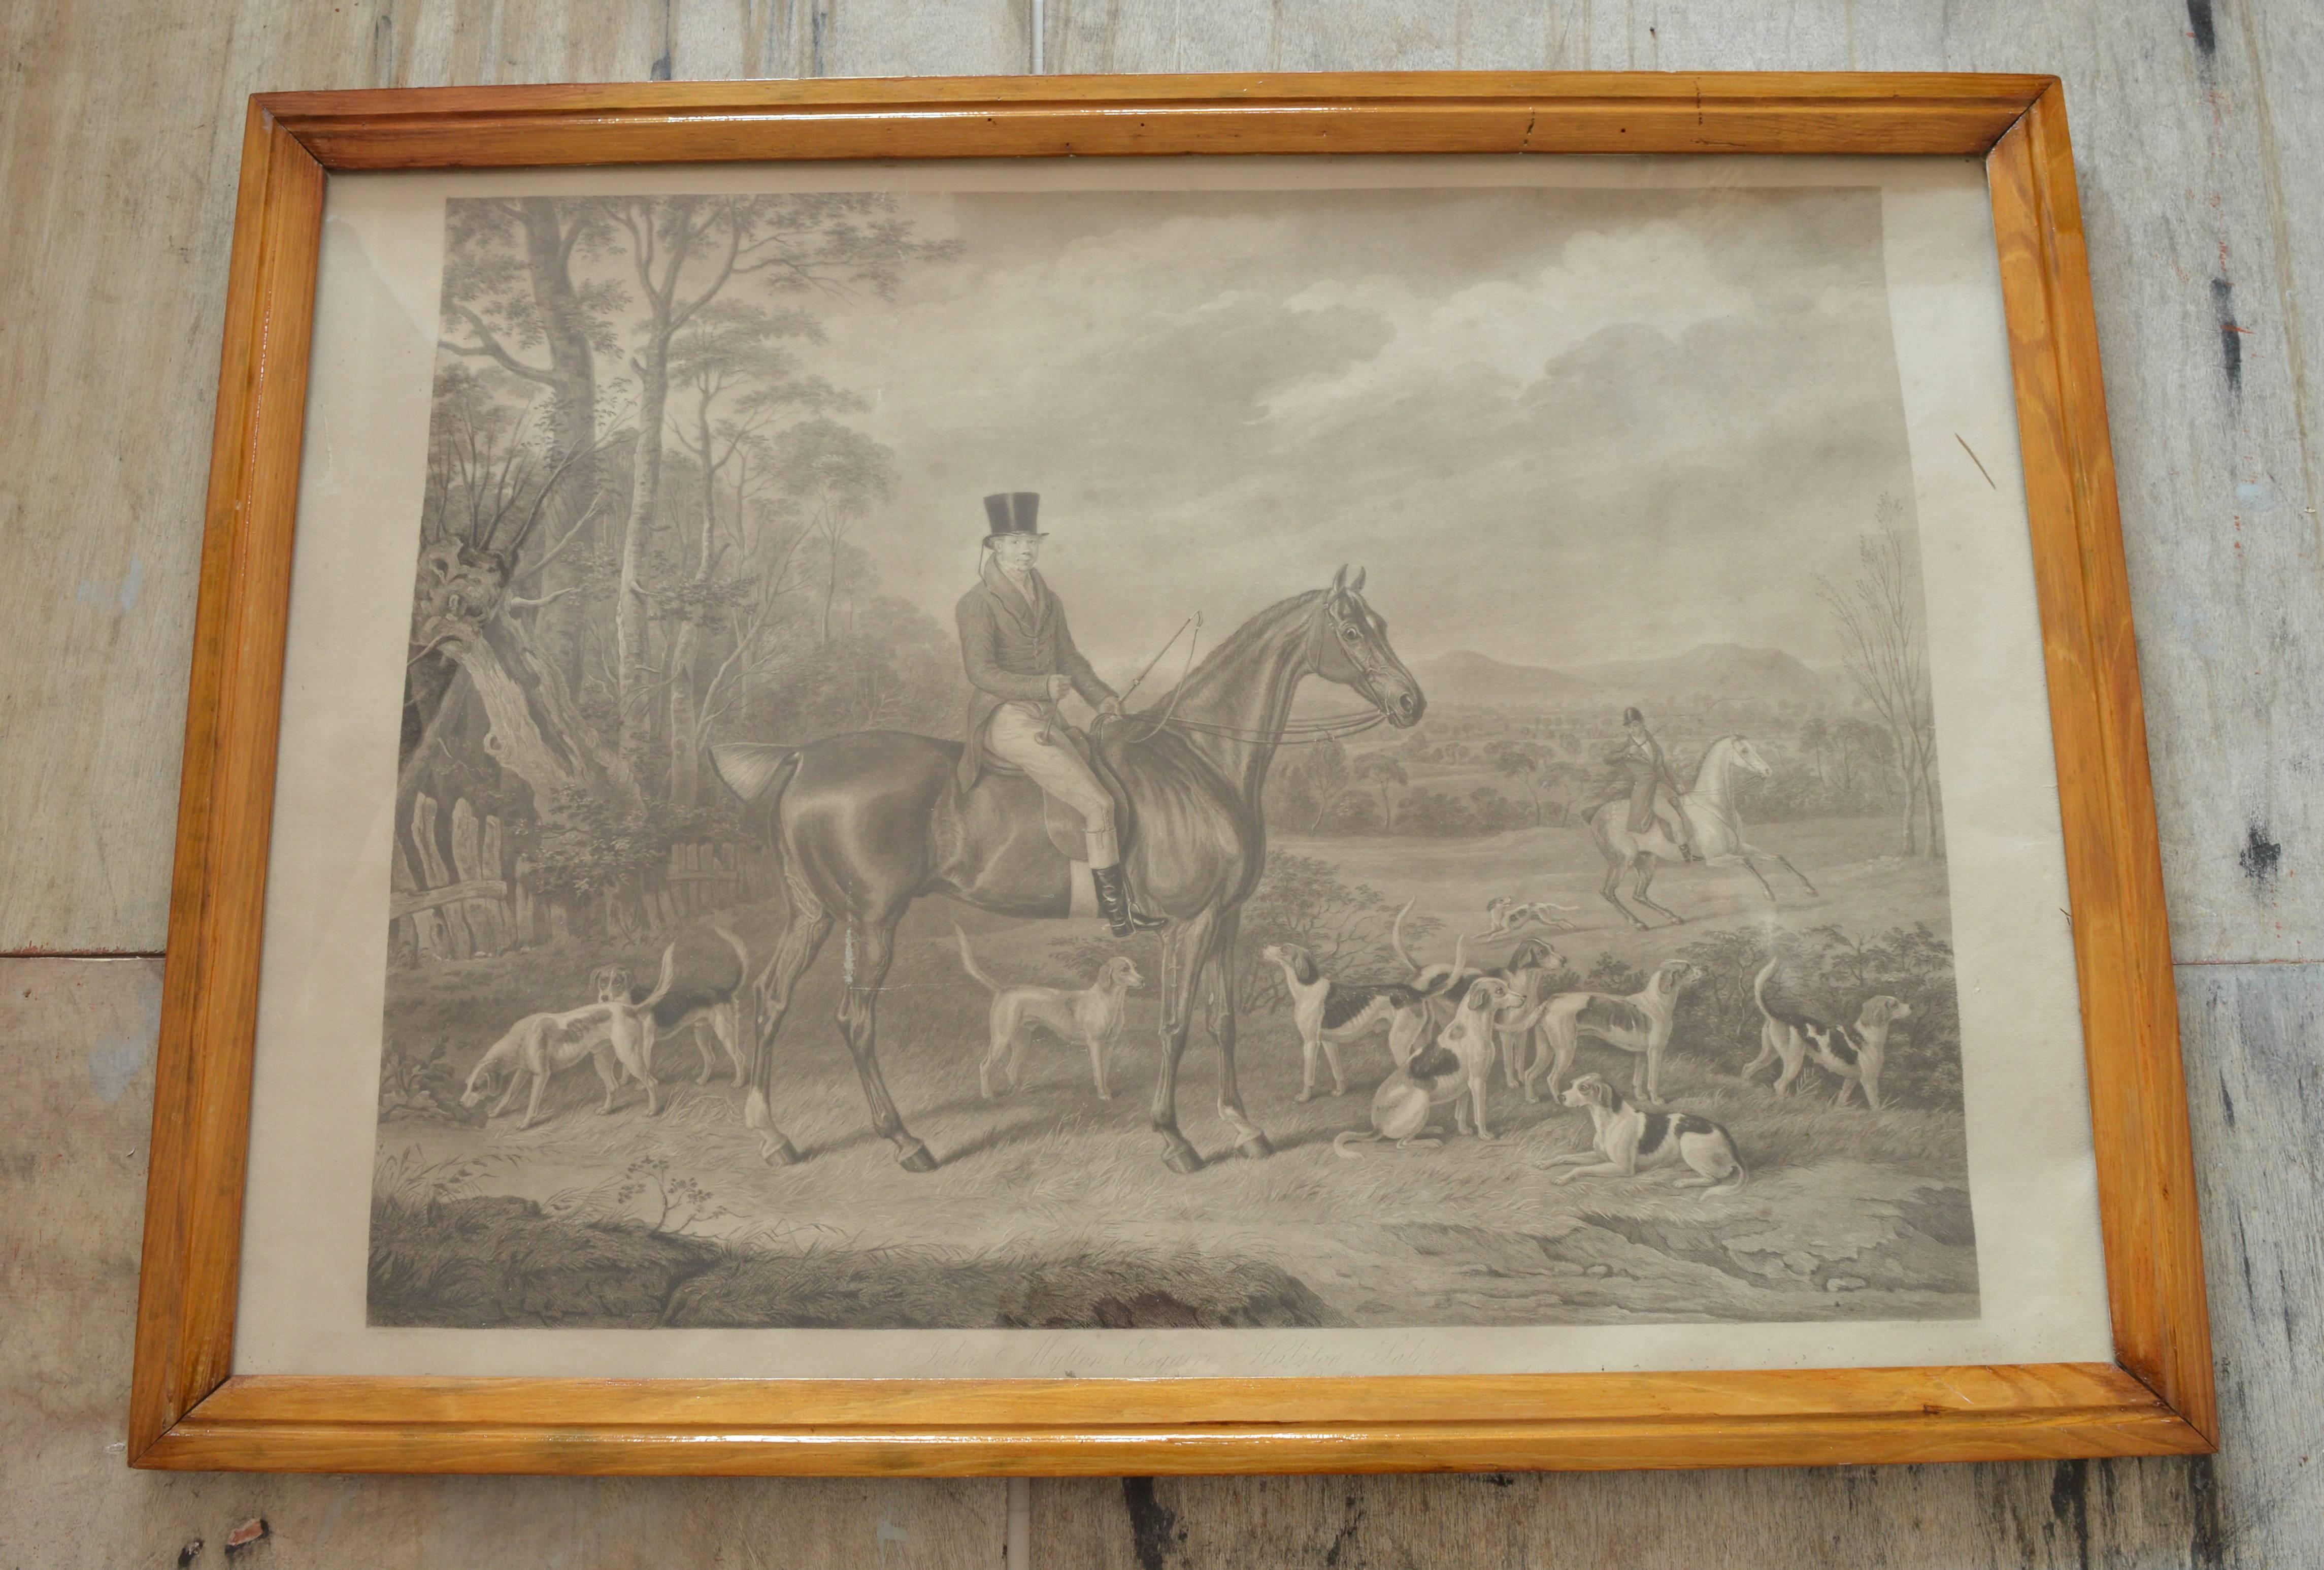 Wonderful sporting print of a mounted gentleman at the hunt.

Titled-John Mytton Esq. Halston, Salop.

It is an aquatint after the original painting by W.Webb. Engraved by W.Giller. 

Published by Ackermann, 1847.

Presented in a lovely